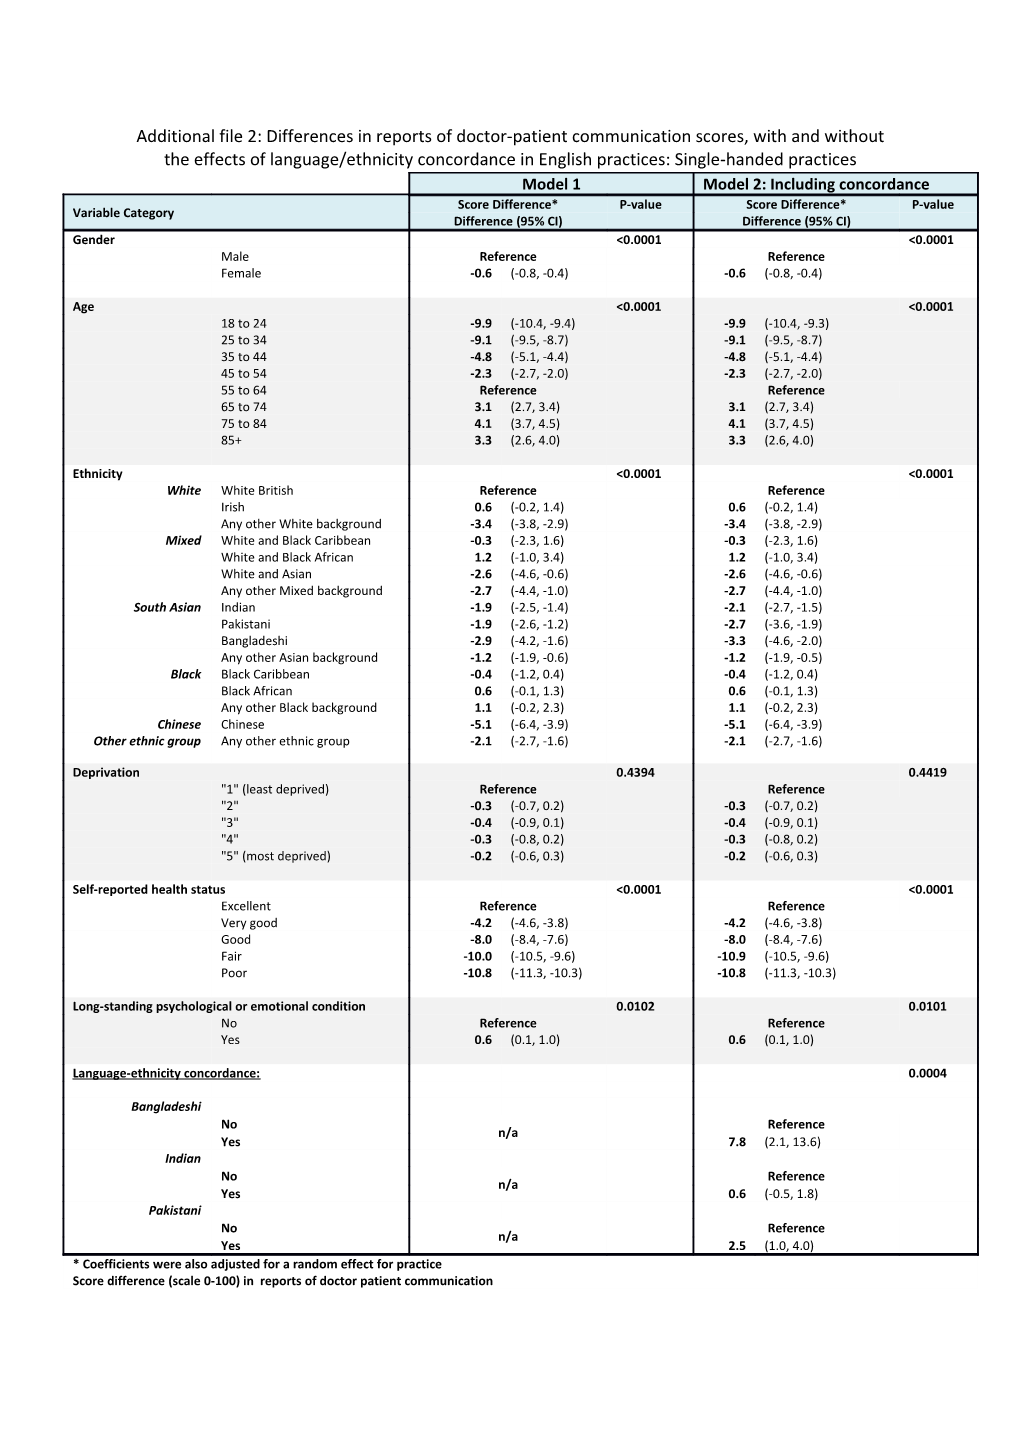 Additional File 2: Differences in Reports of Doctor-Patient Communication Scores, With